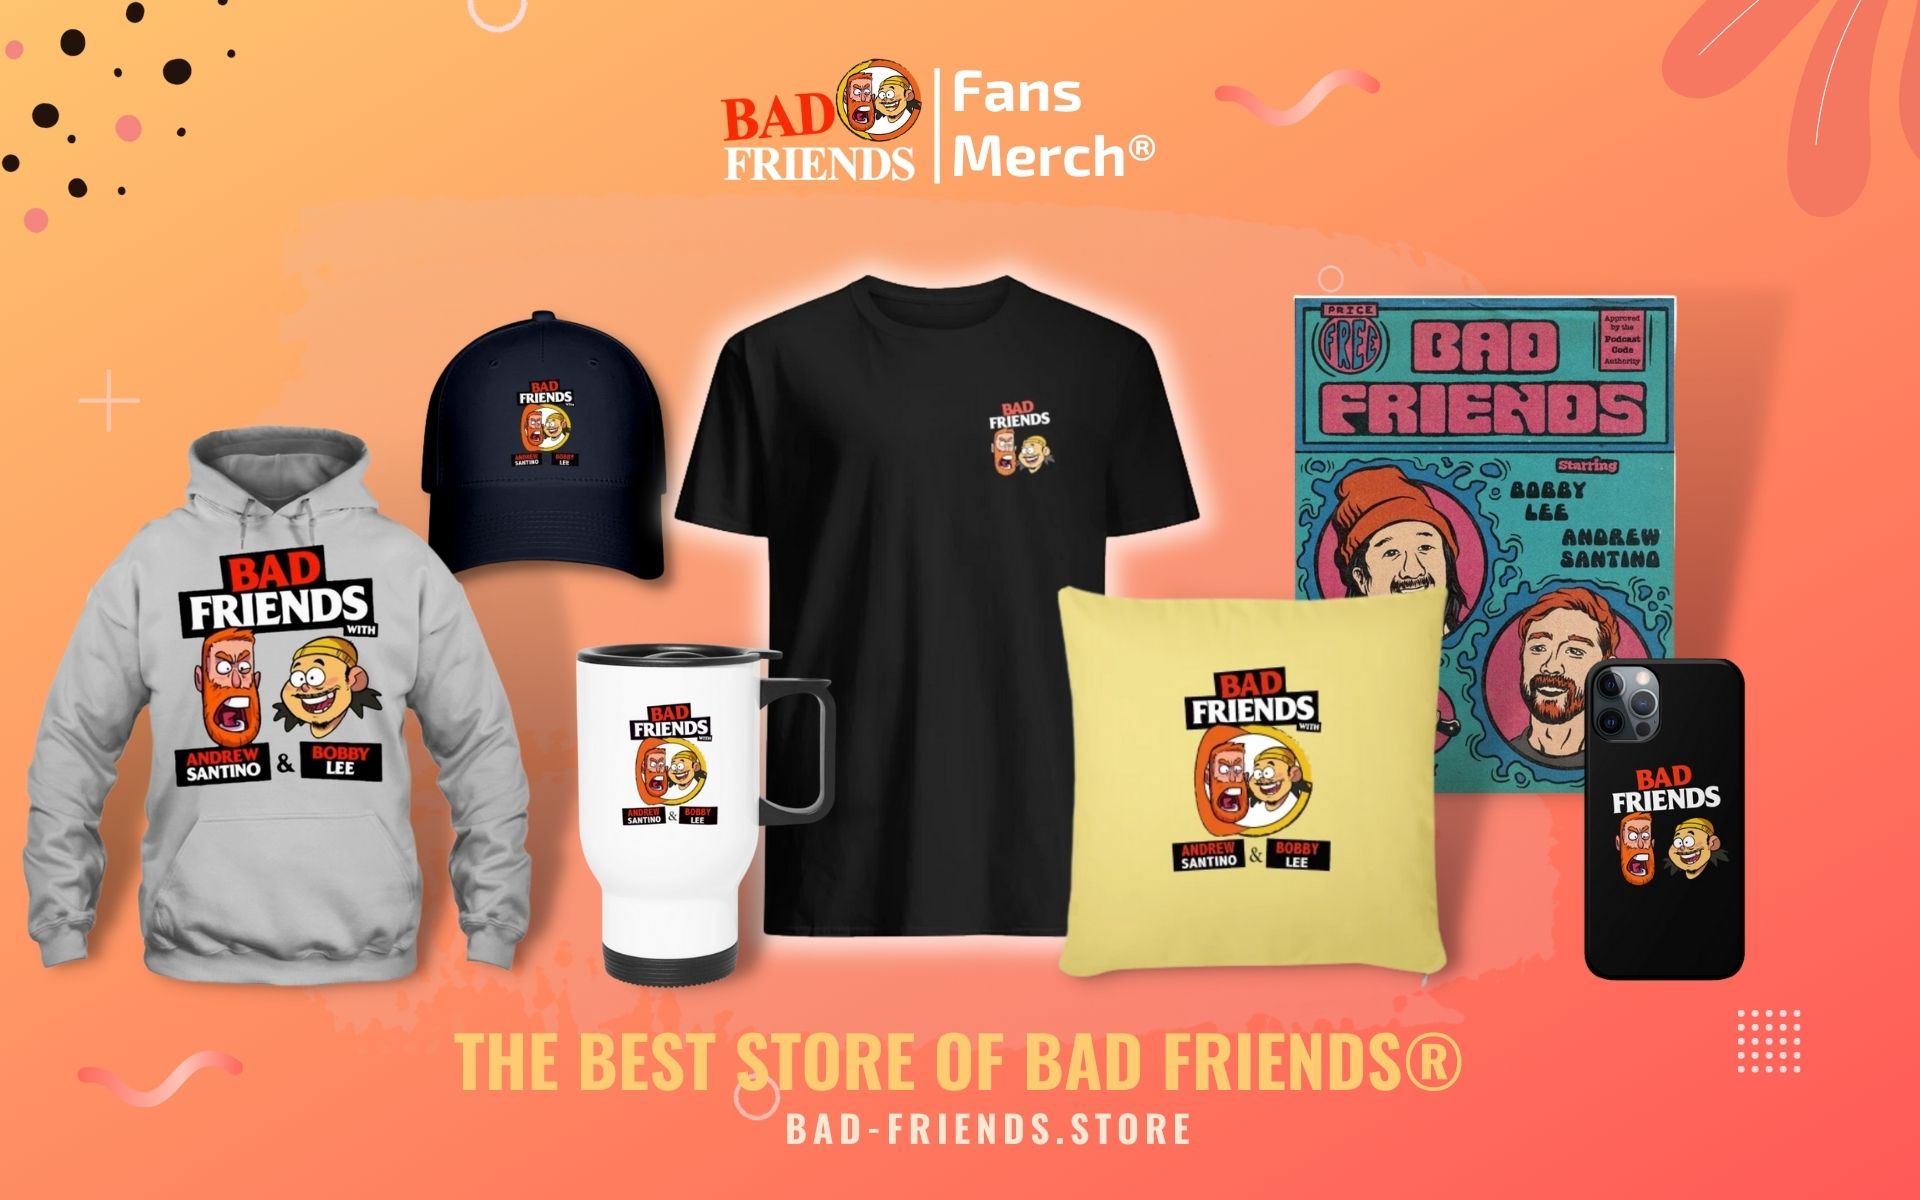 Bad Friends Store Web Banner - Bad Friends Store